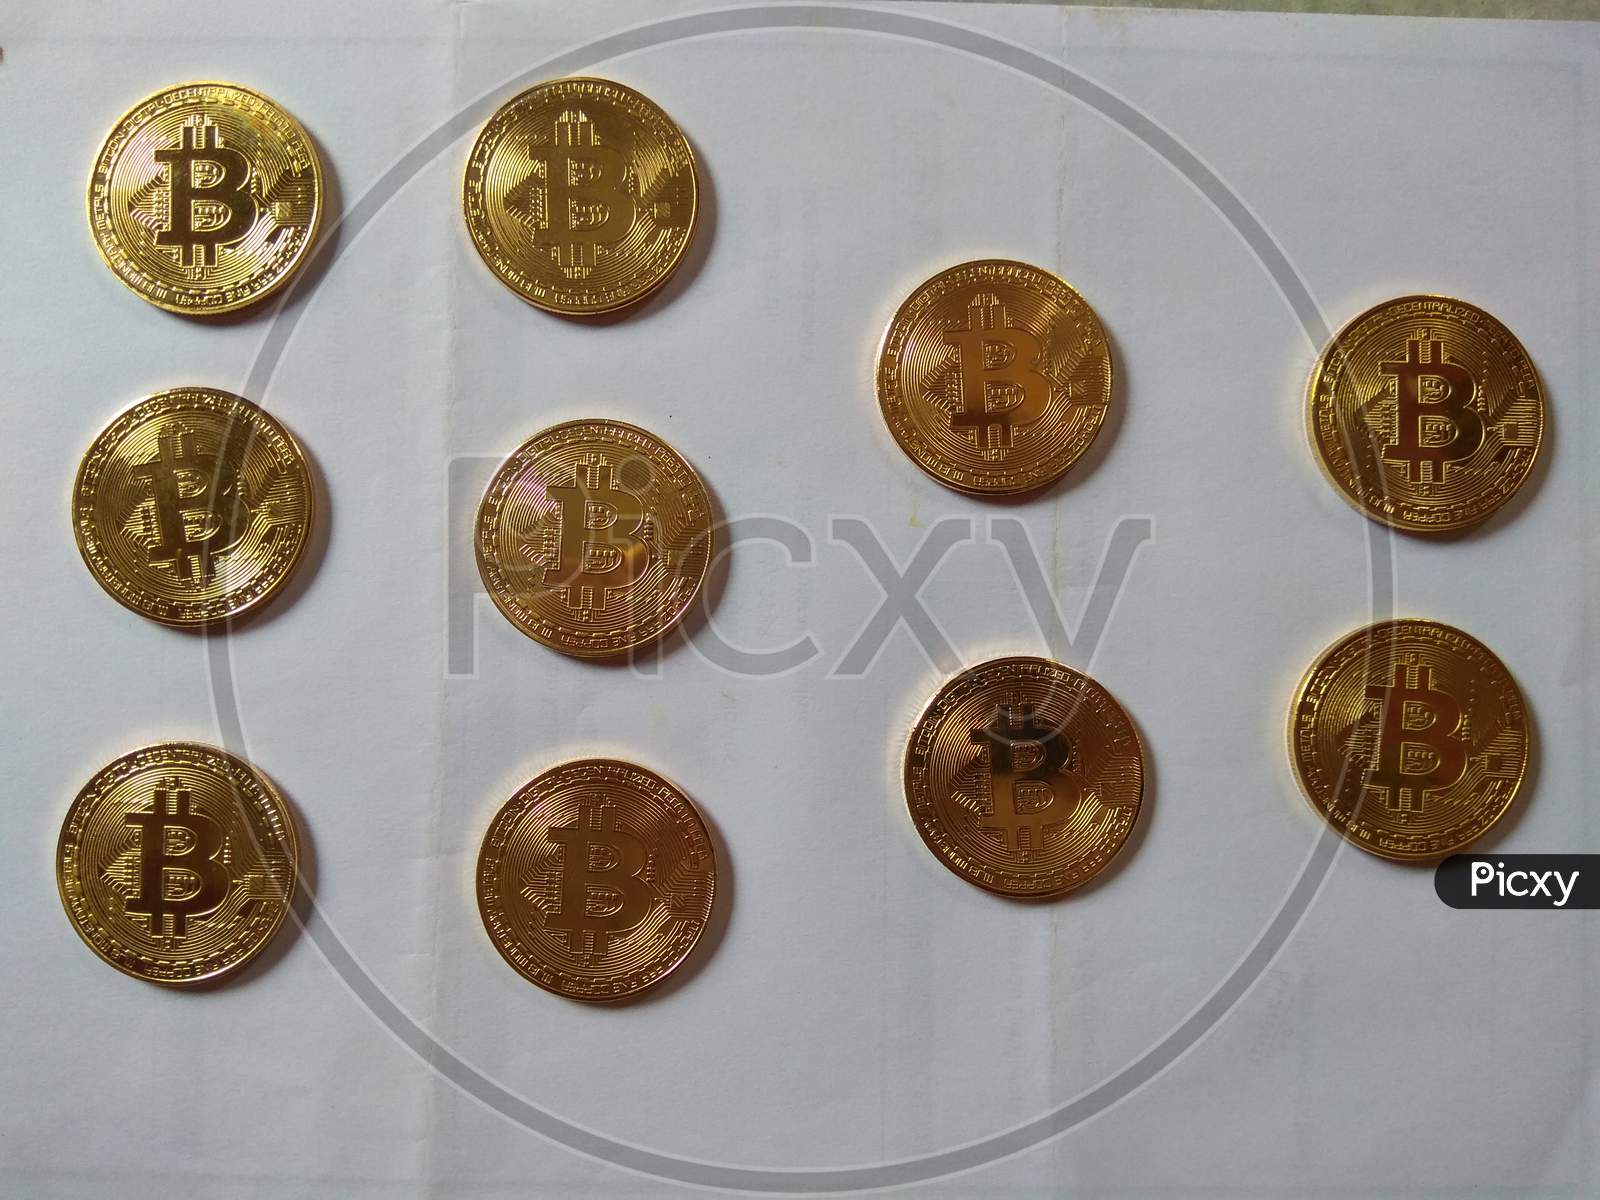 Multiple Physical Bitcoin Art Coins Front View Golden Coated Shining